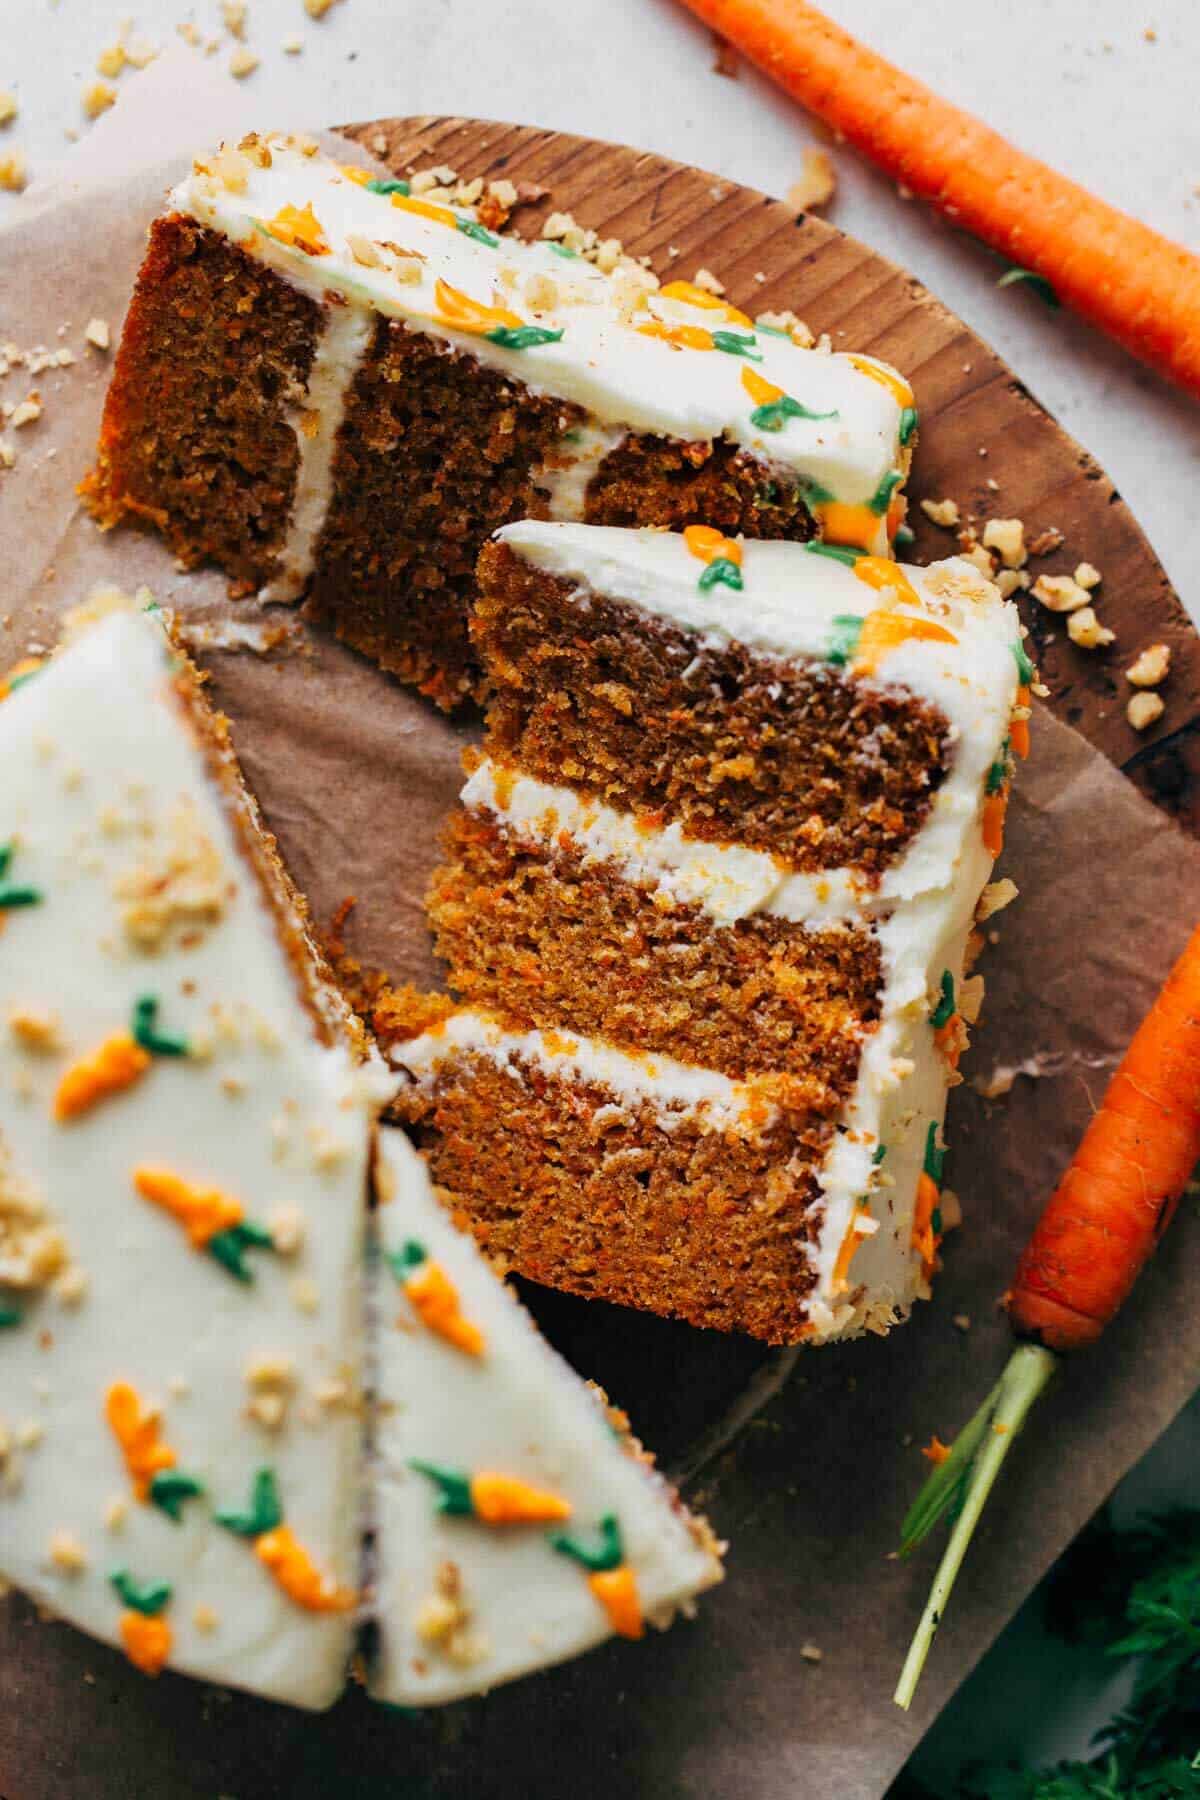 Carrot Cake Recipe - NYT Cooking